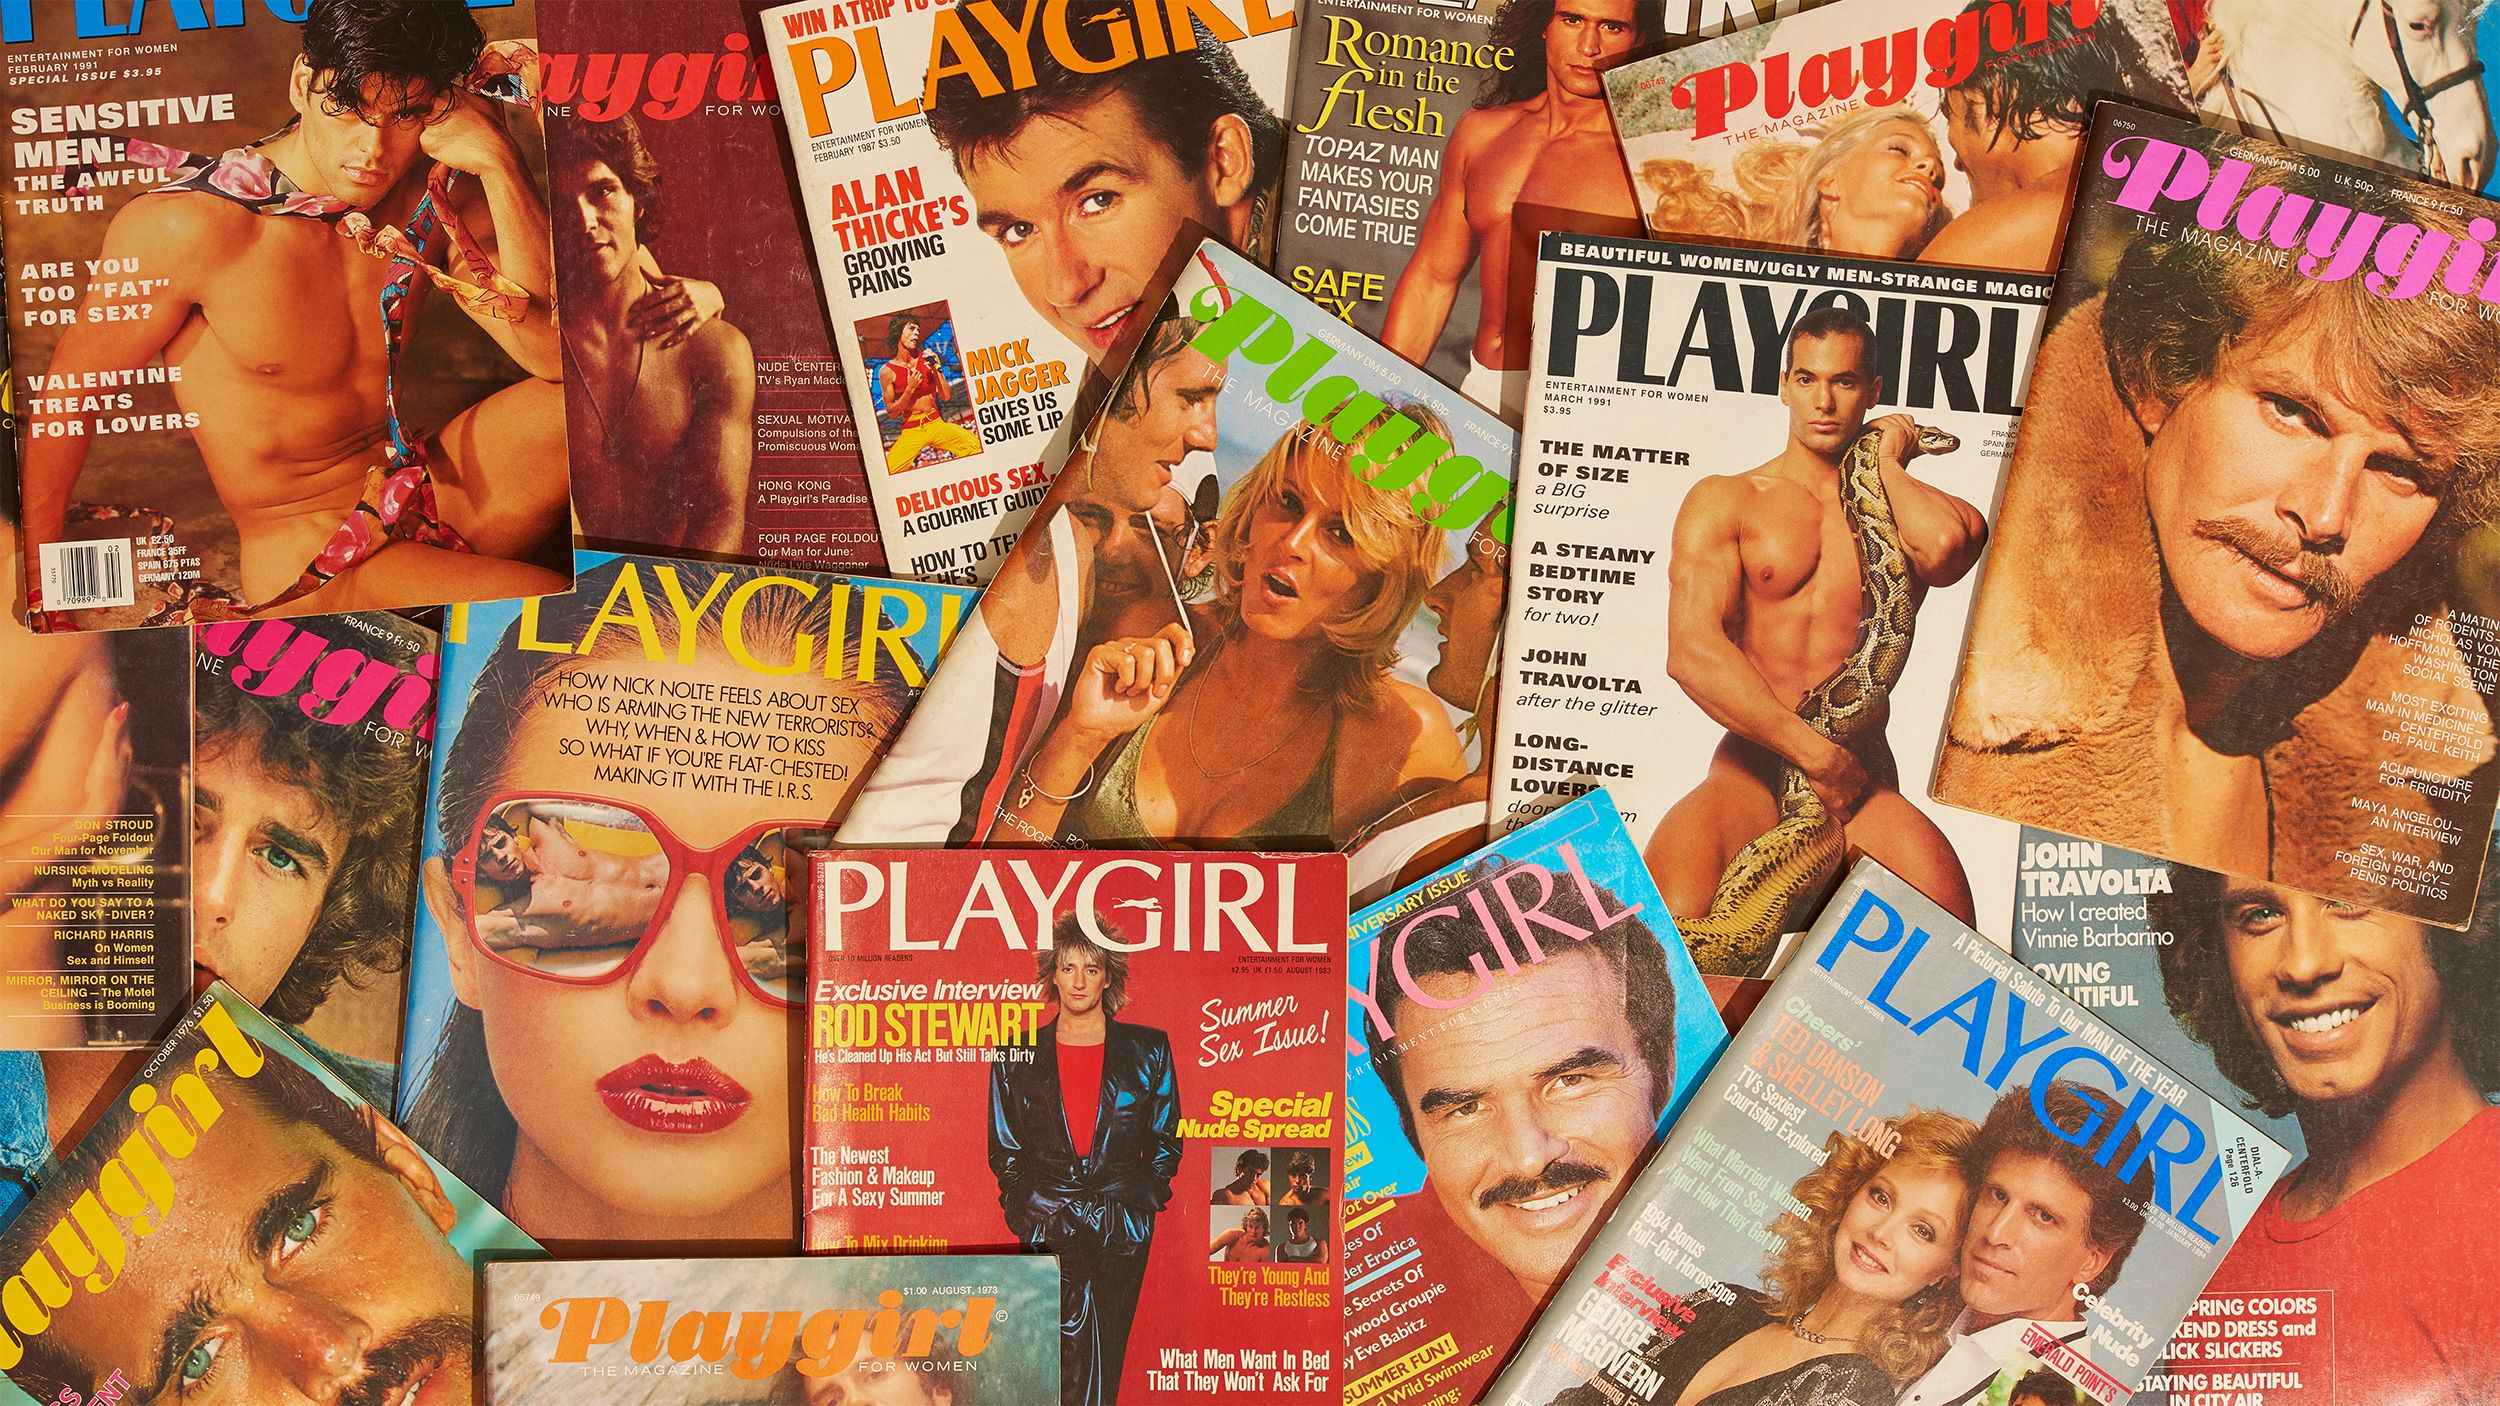 Naughty American Blackmail Sex - History of Playgirl Magazine - How Playgirl Normalized Male Nudity